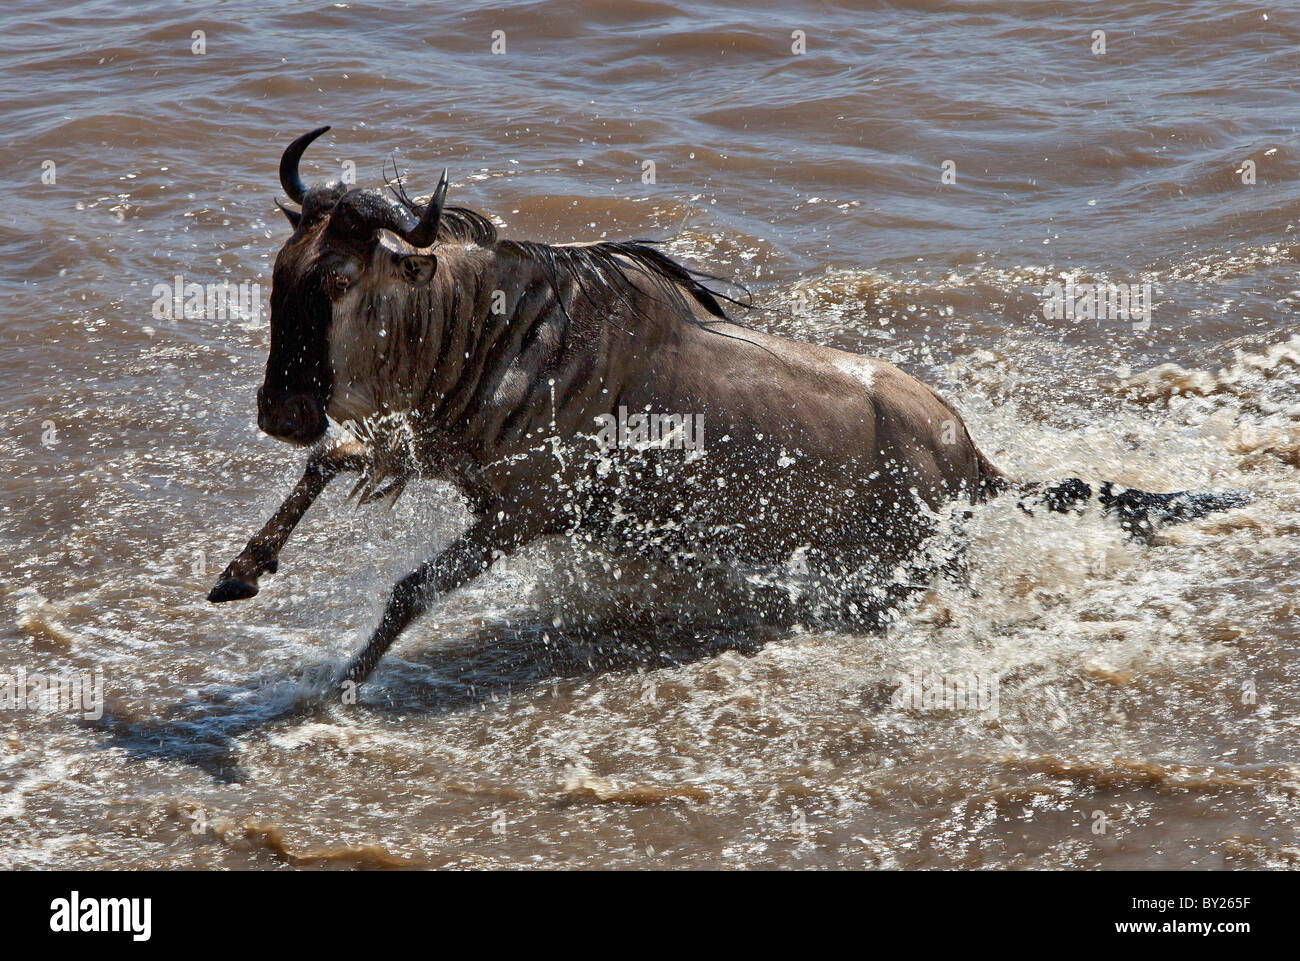 A wildebeest crossing the Mara River during their annual migration from the Serengeti National Park in Northern Tanzania to the Stock Photo